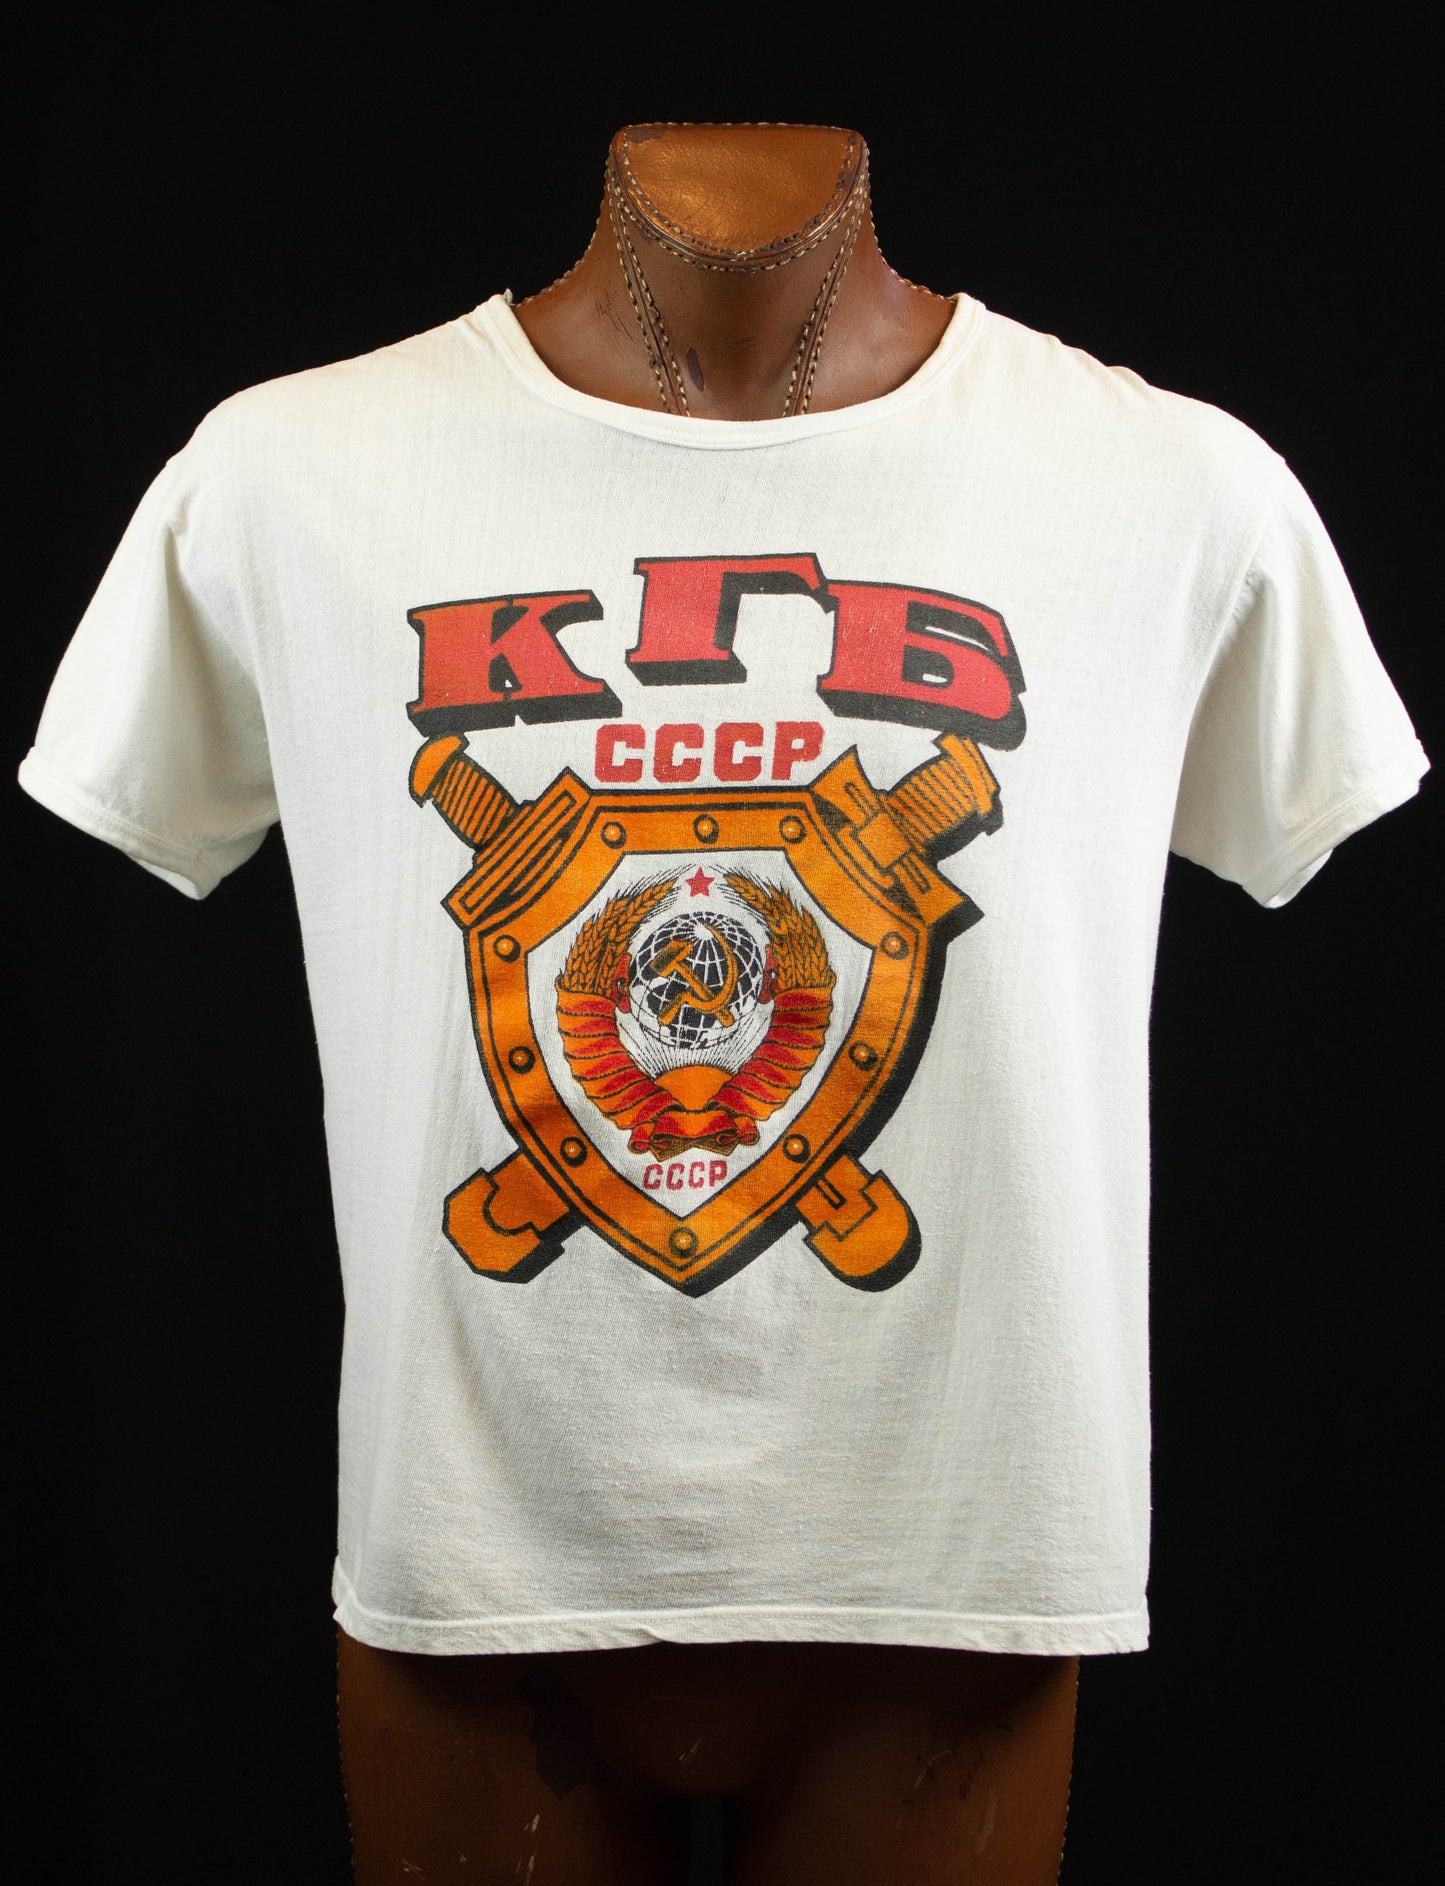 Vintage KGB Soviet Union Graphic T Shirt 80s White and Red Large-XL